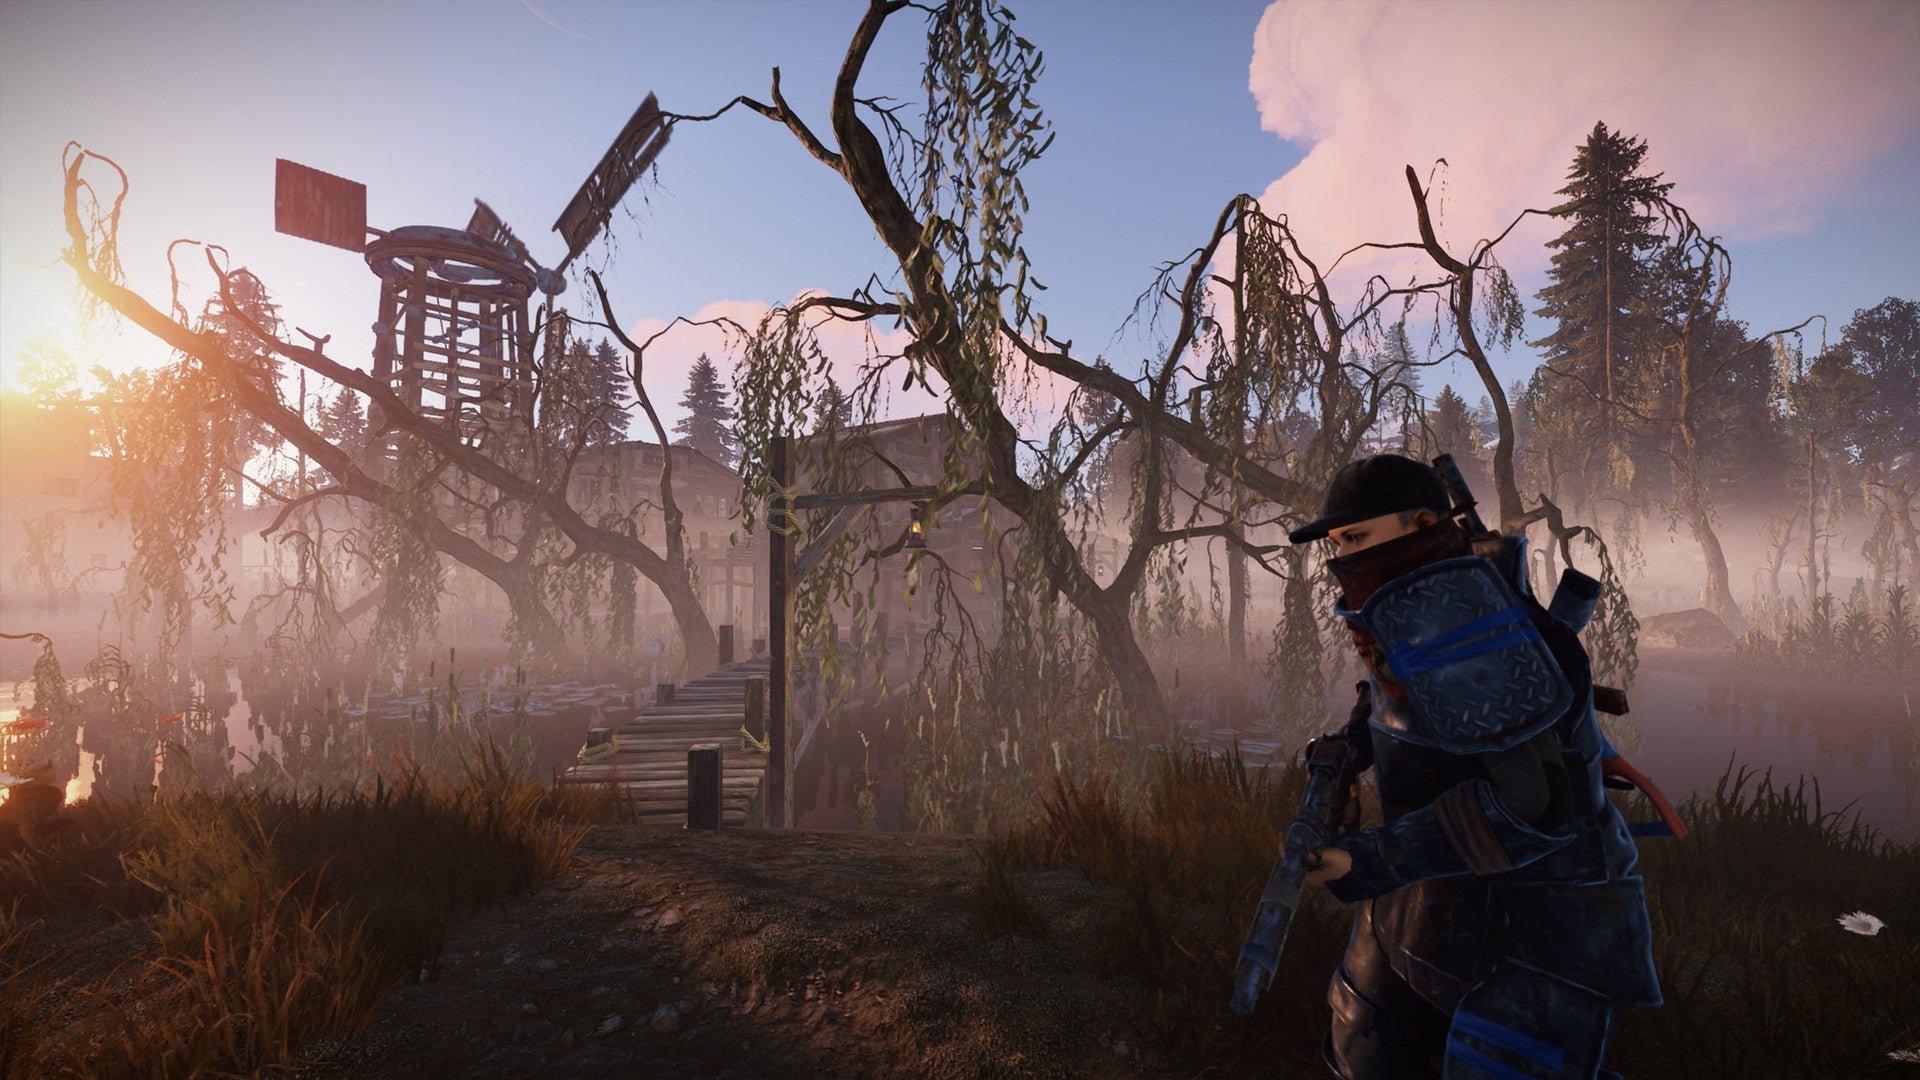 A player walks through a boggy marsh with buildings in the distance in Rust.